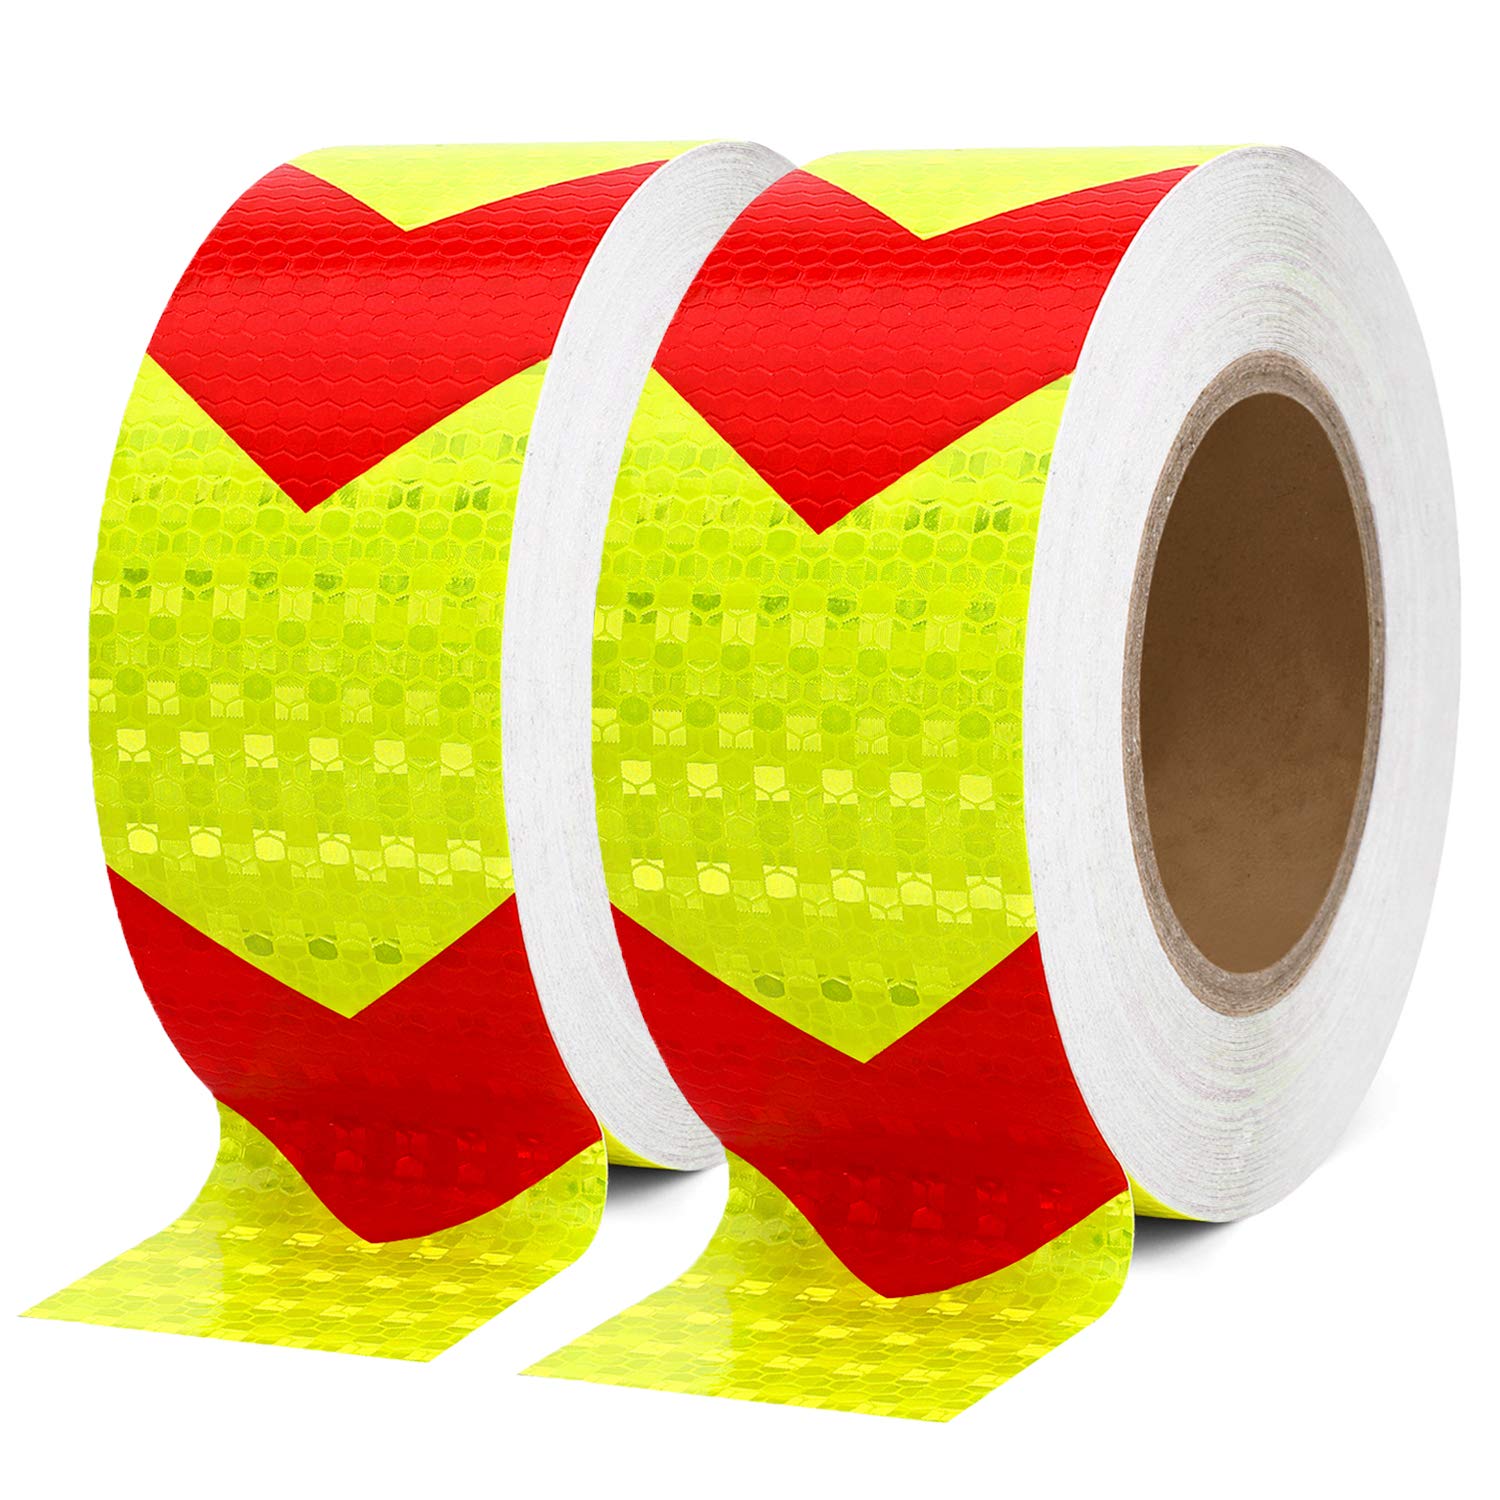 PVC Self-adhesive Reflective Safety Warning Arrow Marking Tape for Trucks